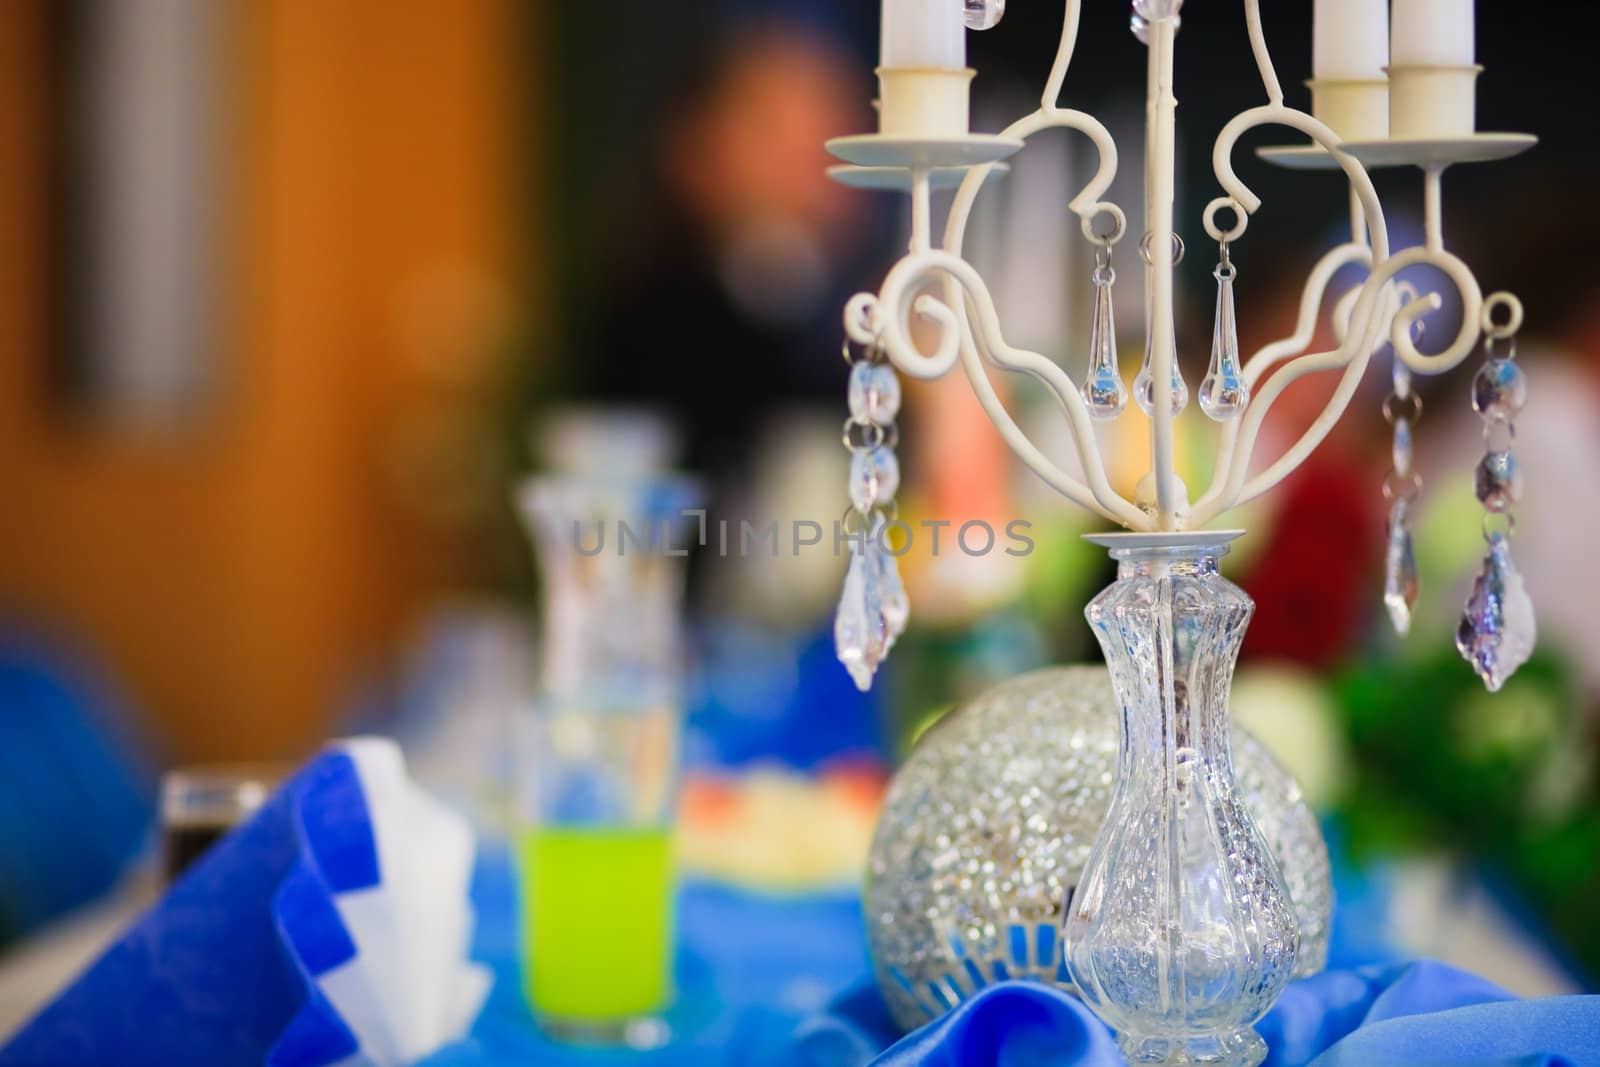 Wedding table set with glasses and small wrapped present